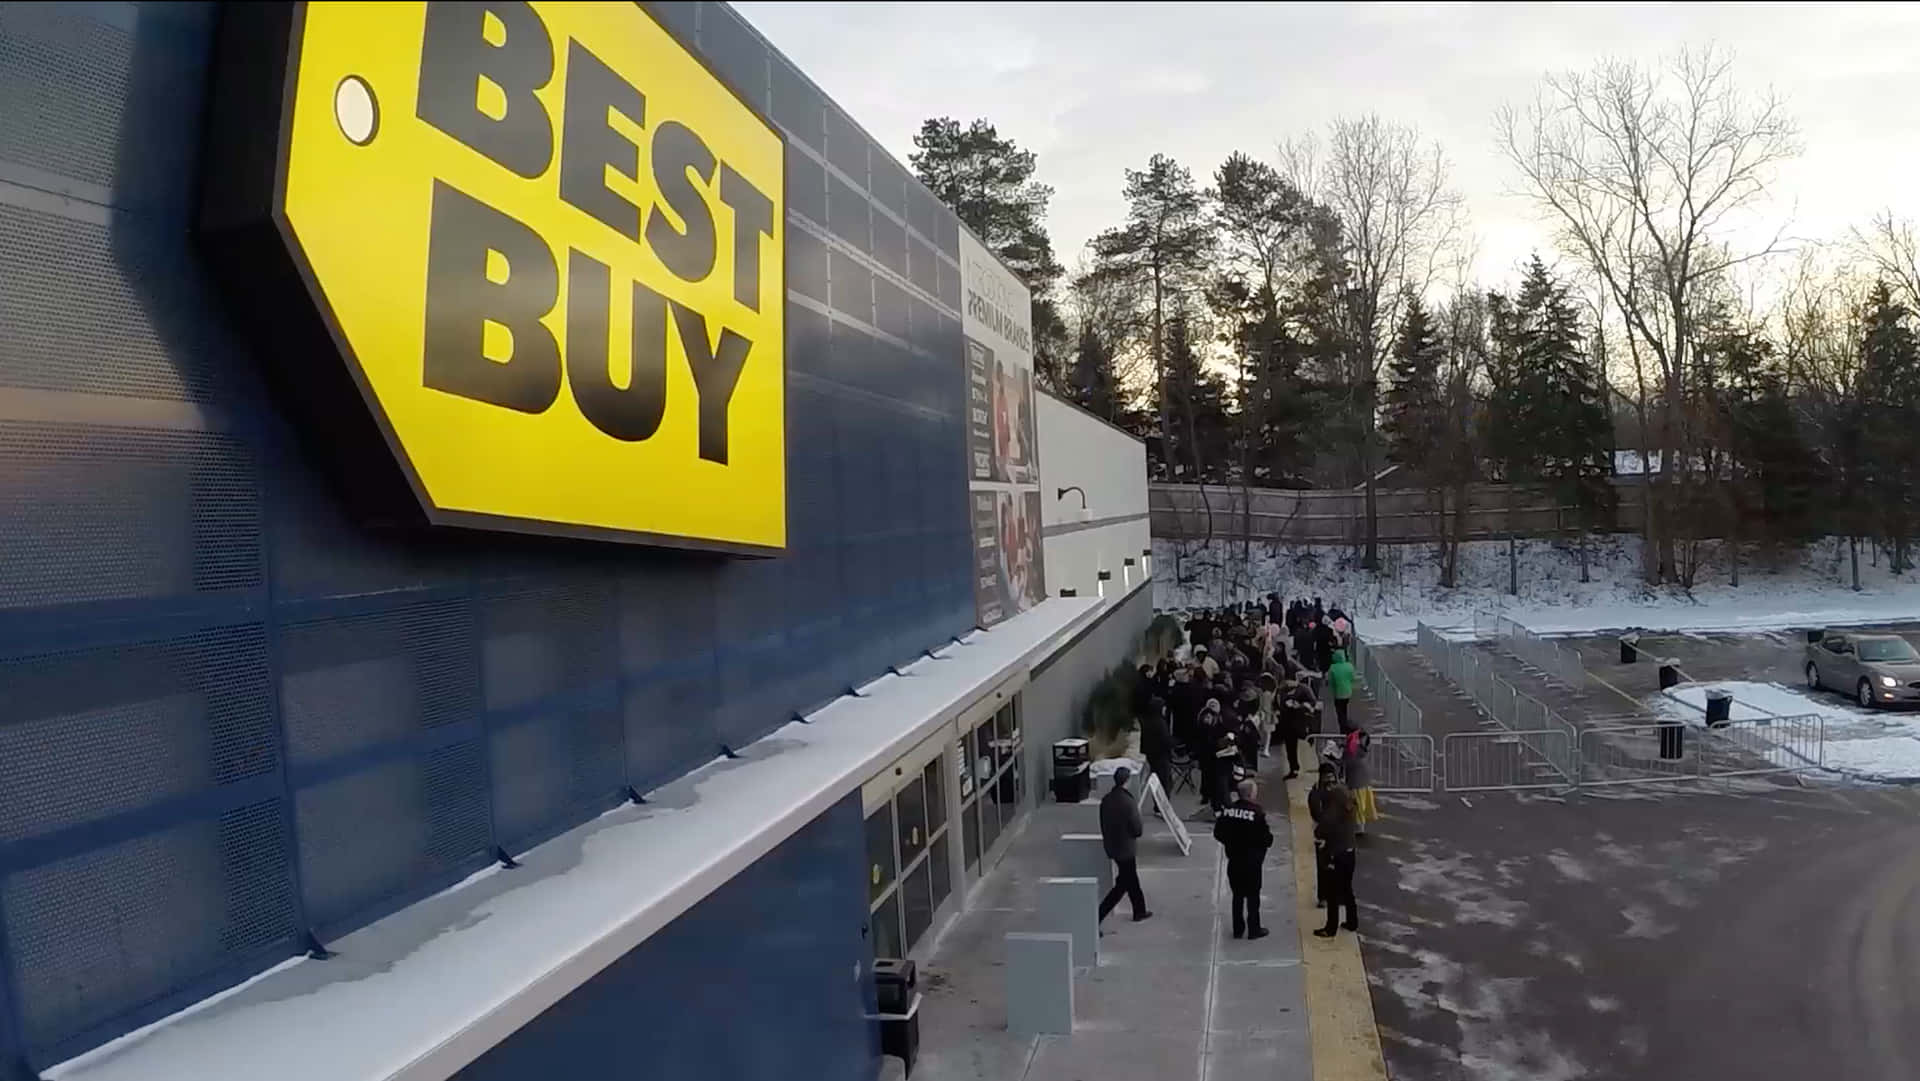 Get the Best Electronics Deals at Best Buy